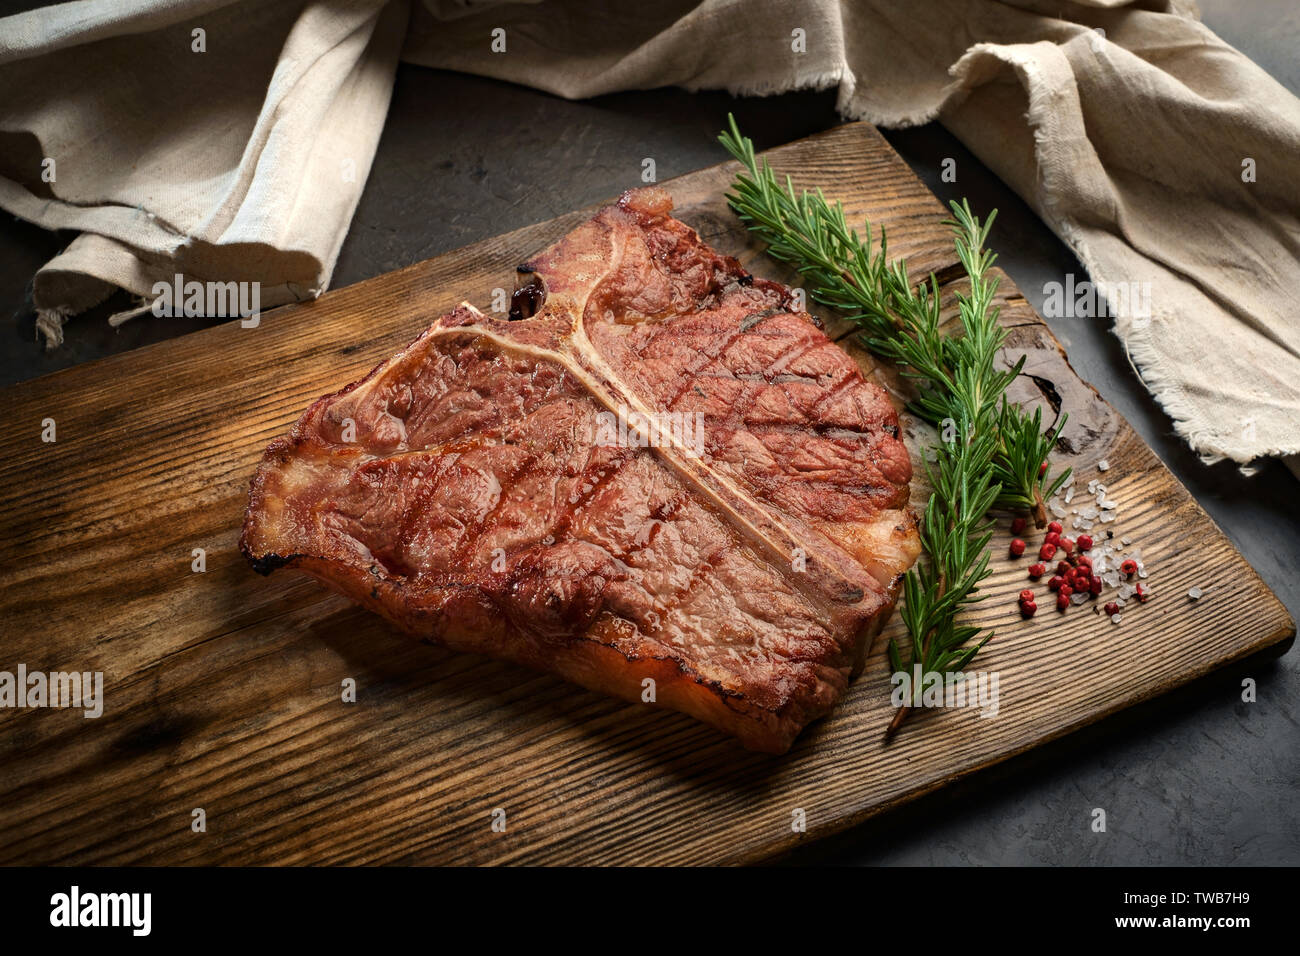 https://c8.alamy.com/comp/TWB7H9/porterhouse-beef-steak-cooked-on-a-grill-on-a-wooden-board-TWB7H9.jpg